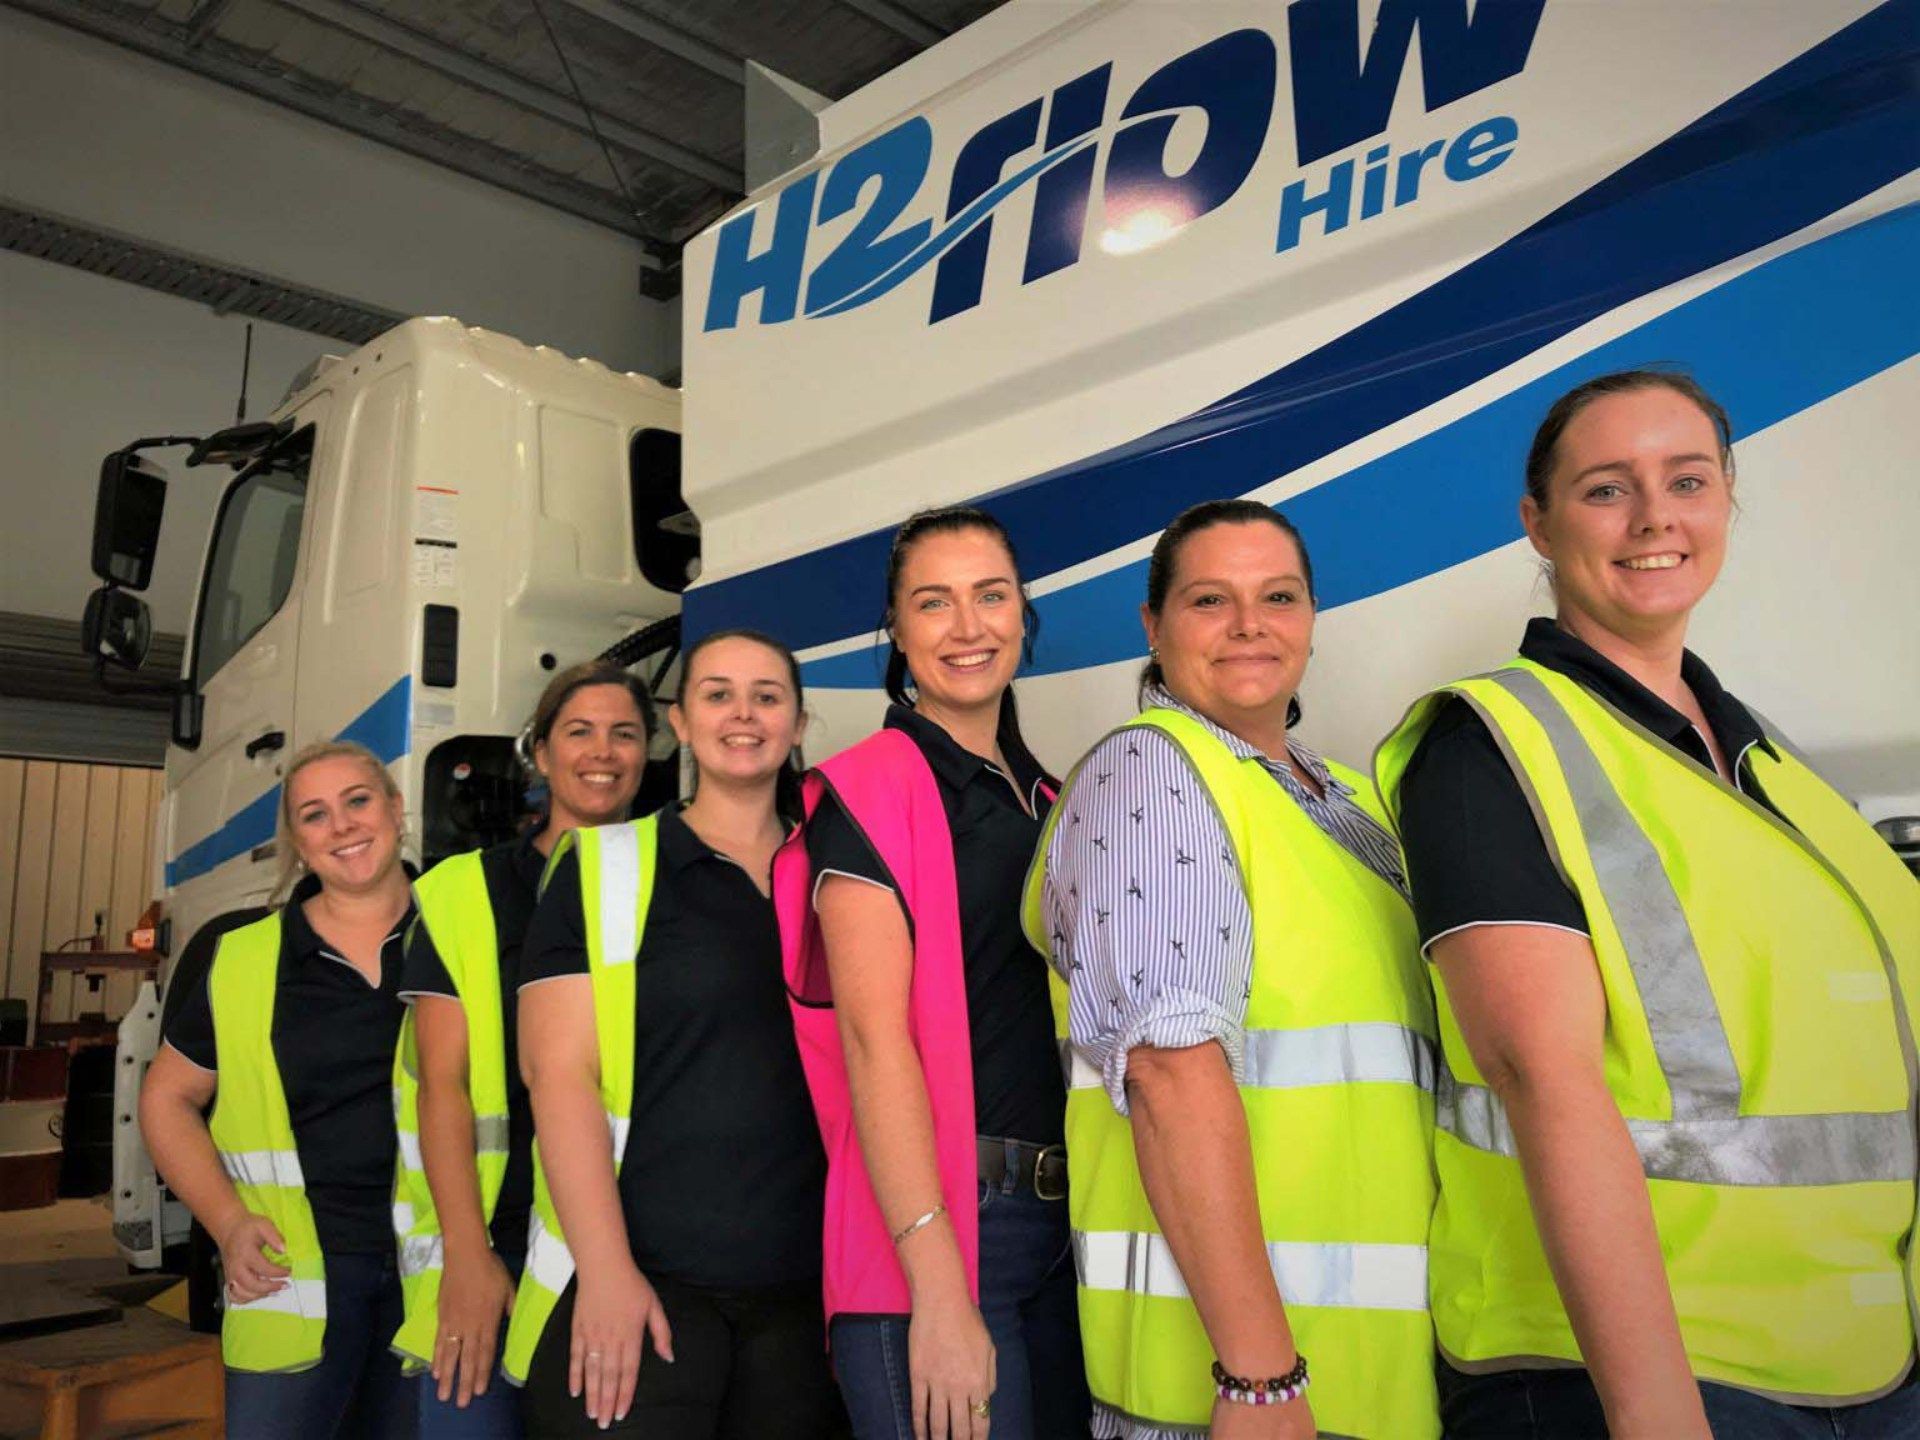 Celebrating the contributions from the women at H2flow Hire